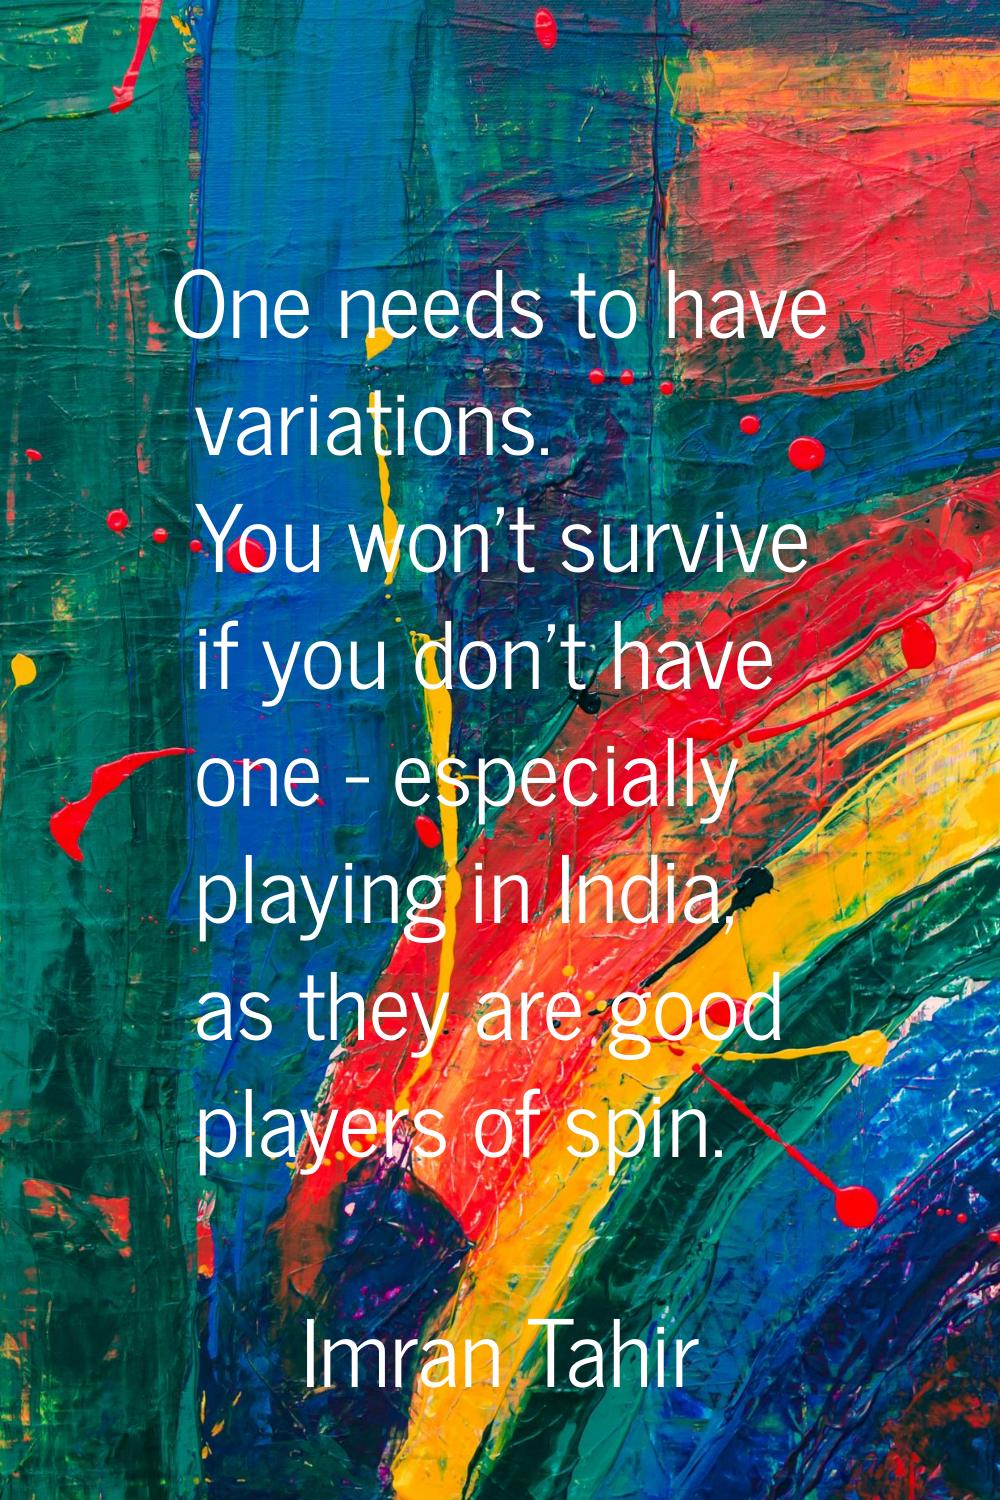 One needs to have variations. You won't survive if you don't have one - especially playing in India